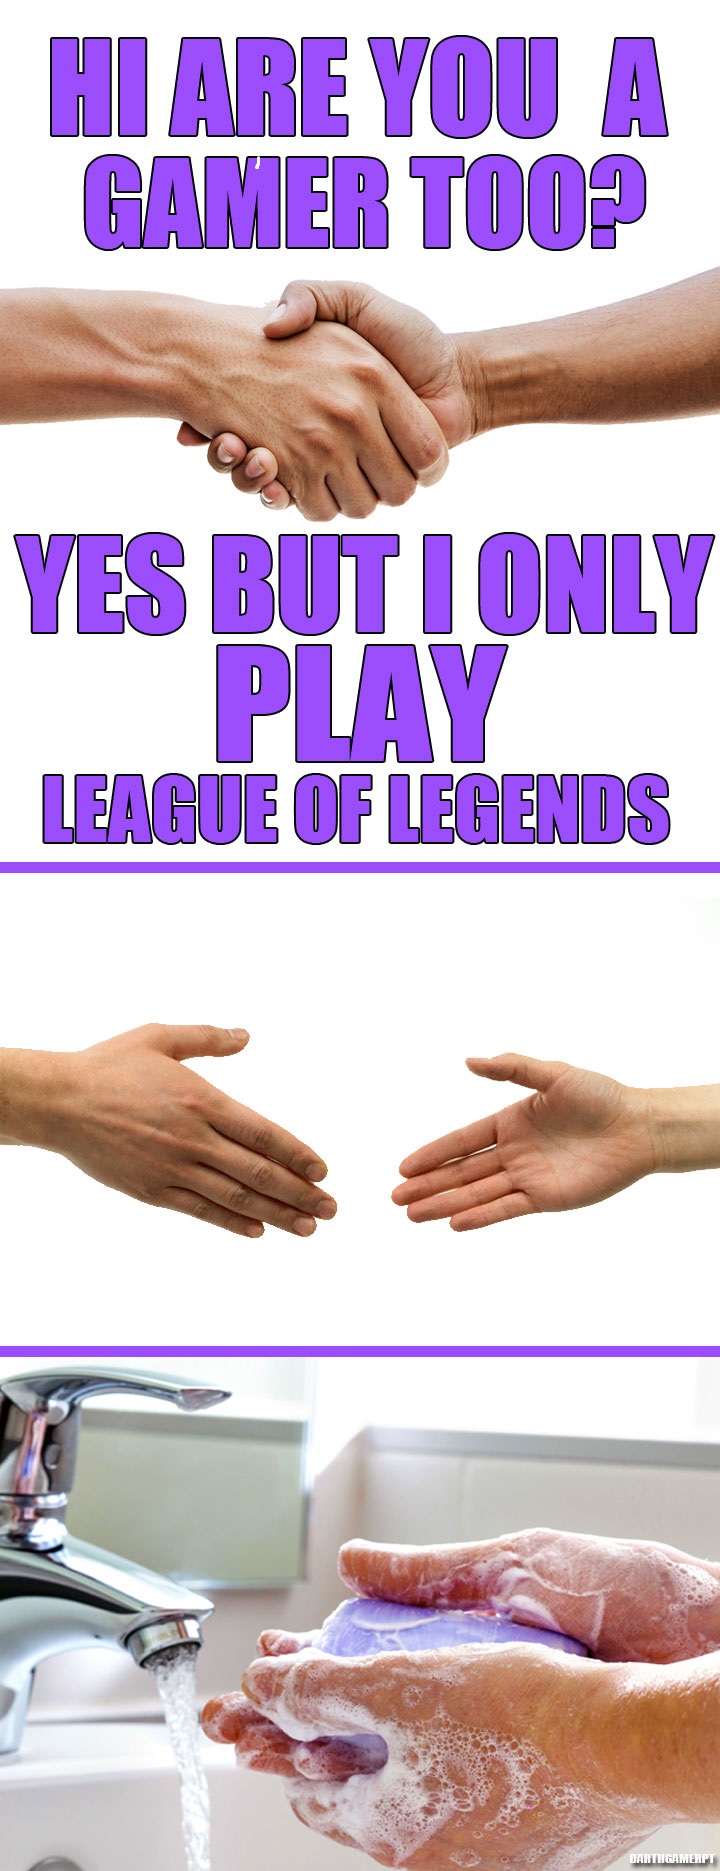 nail - Hi Are You A Gamer Too? Yes But I Only League Of Legends Darthgamerpt